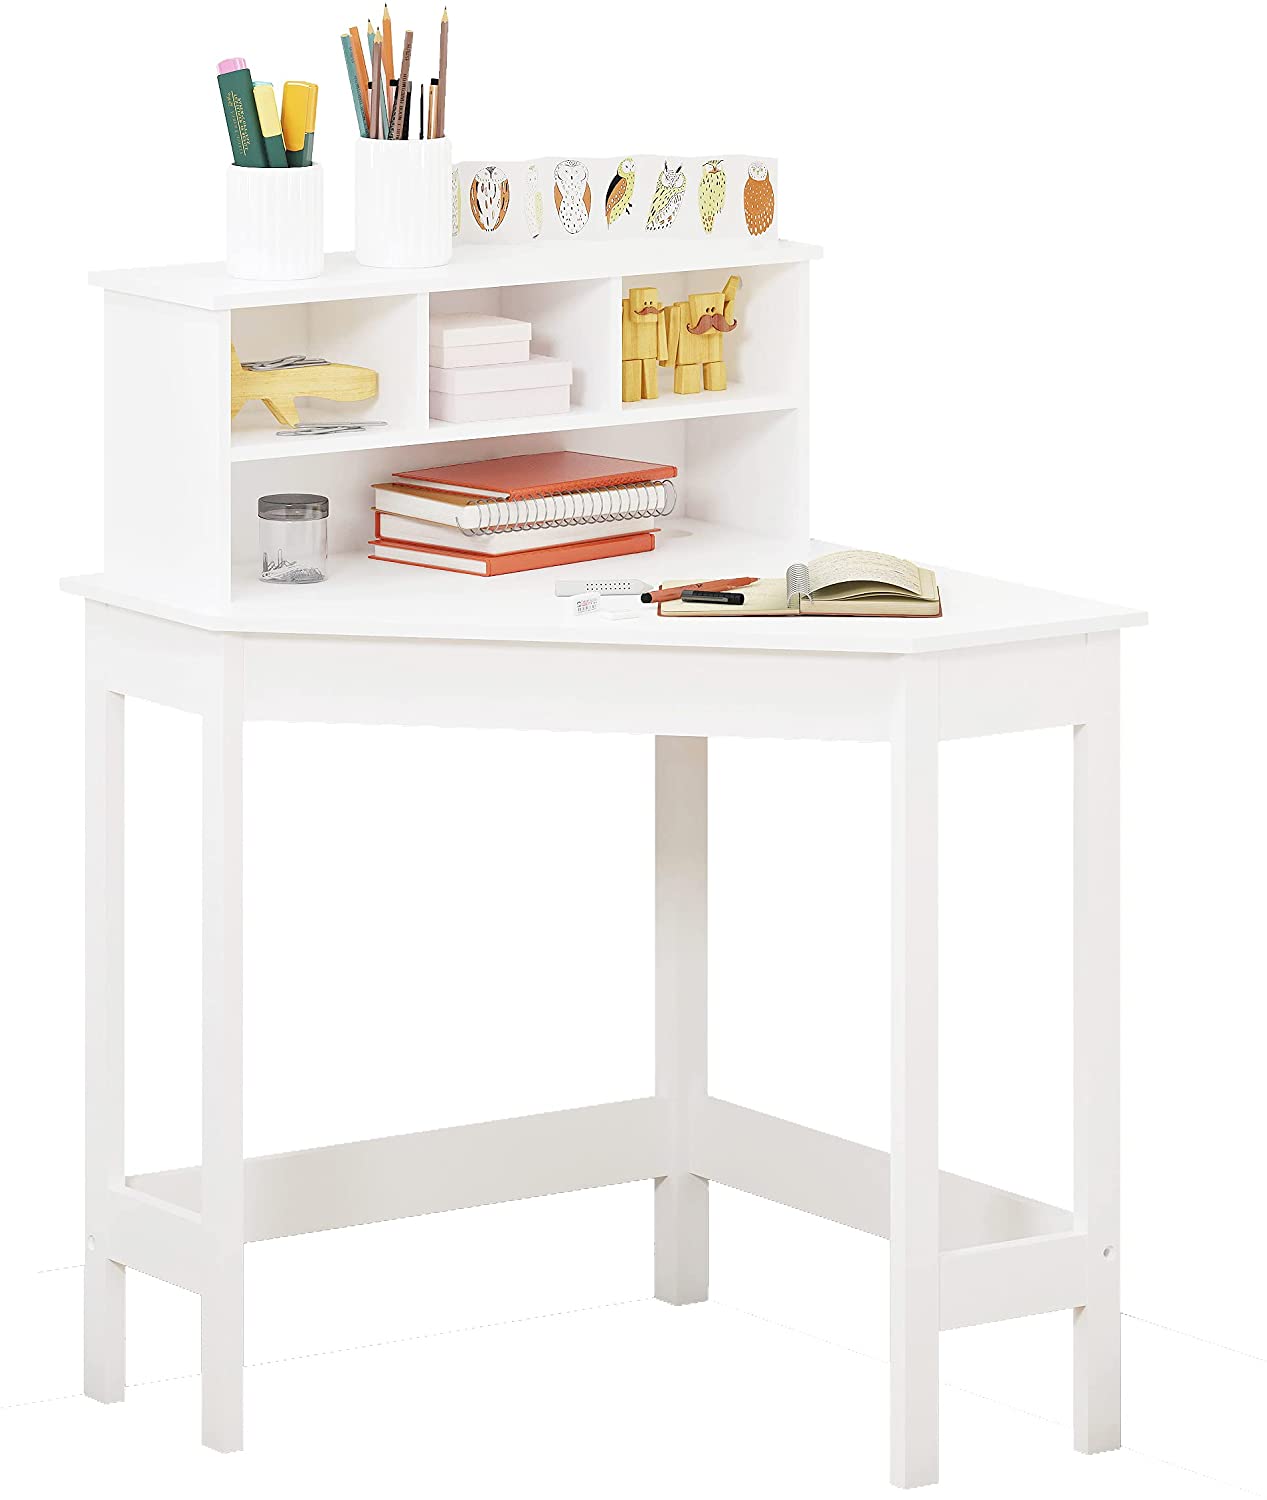 UTEX Corner Desk with Storage and Hutch for Small Space